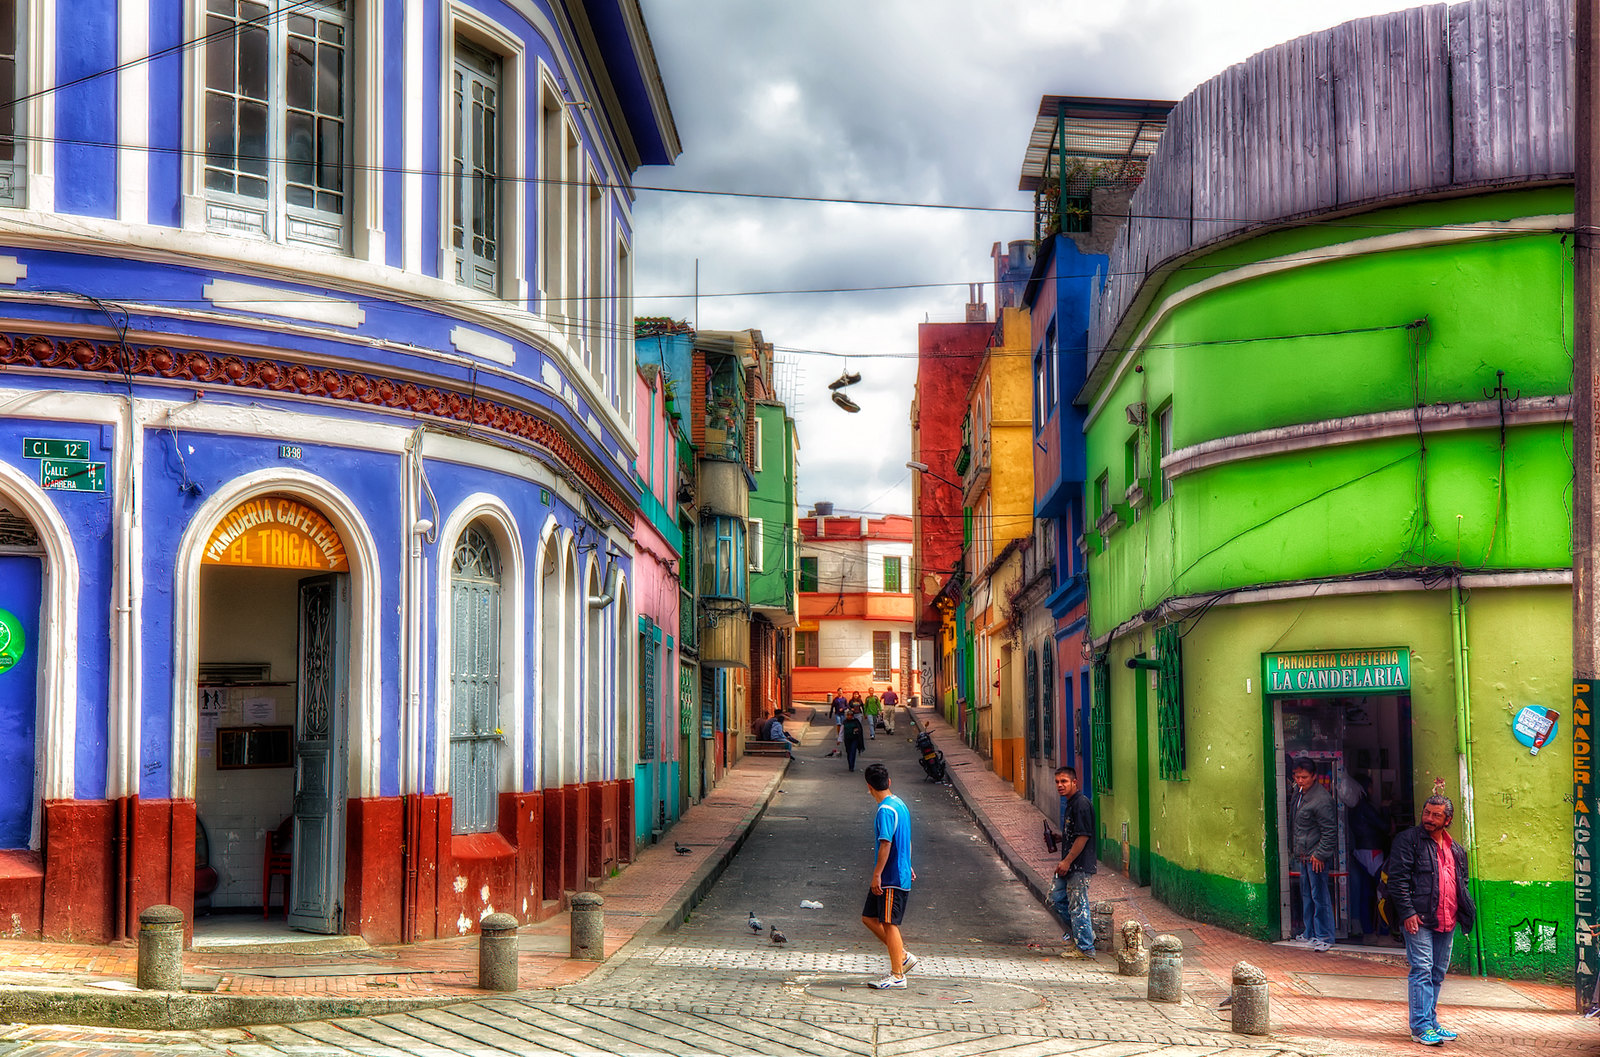 A colorful street in La Candelaria, the old part of Bogota, Colombia